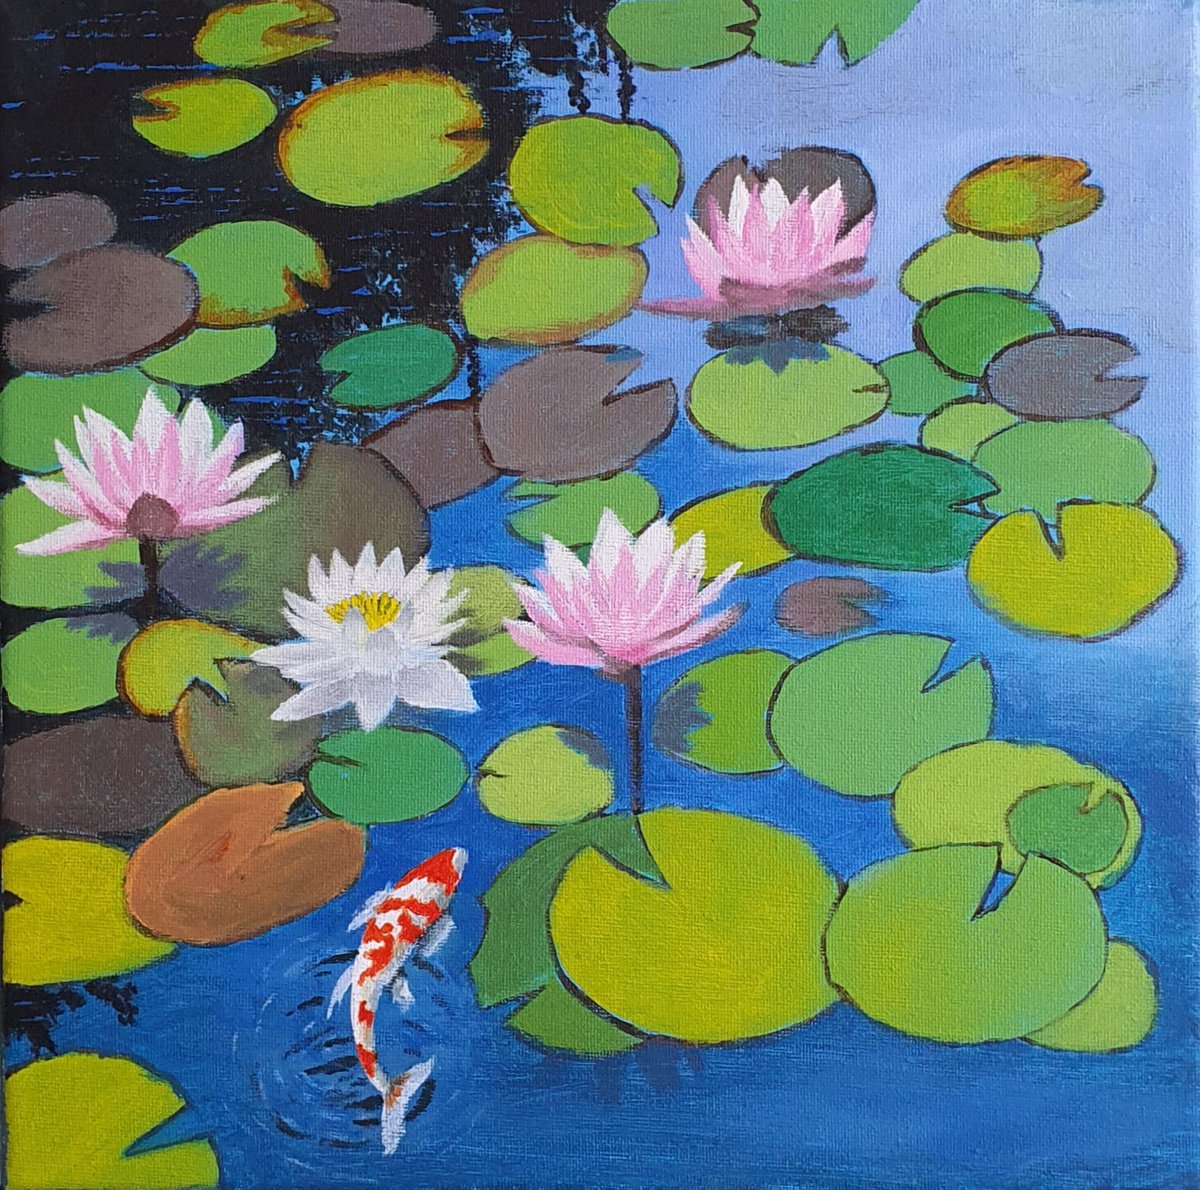 Water Lilies in Pond by Asif Rasheed